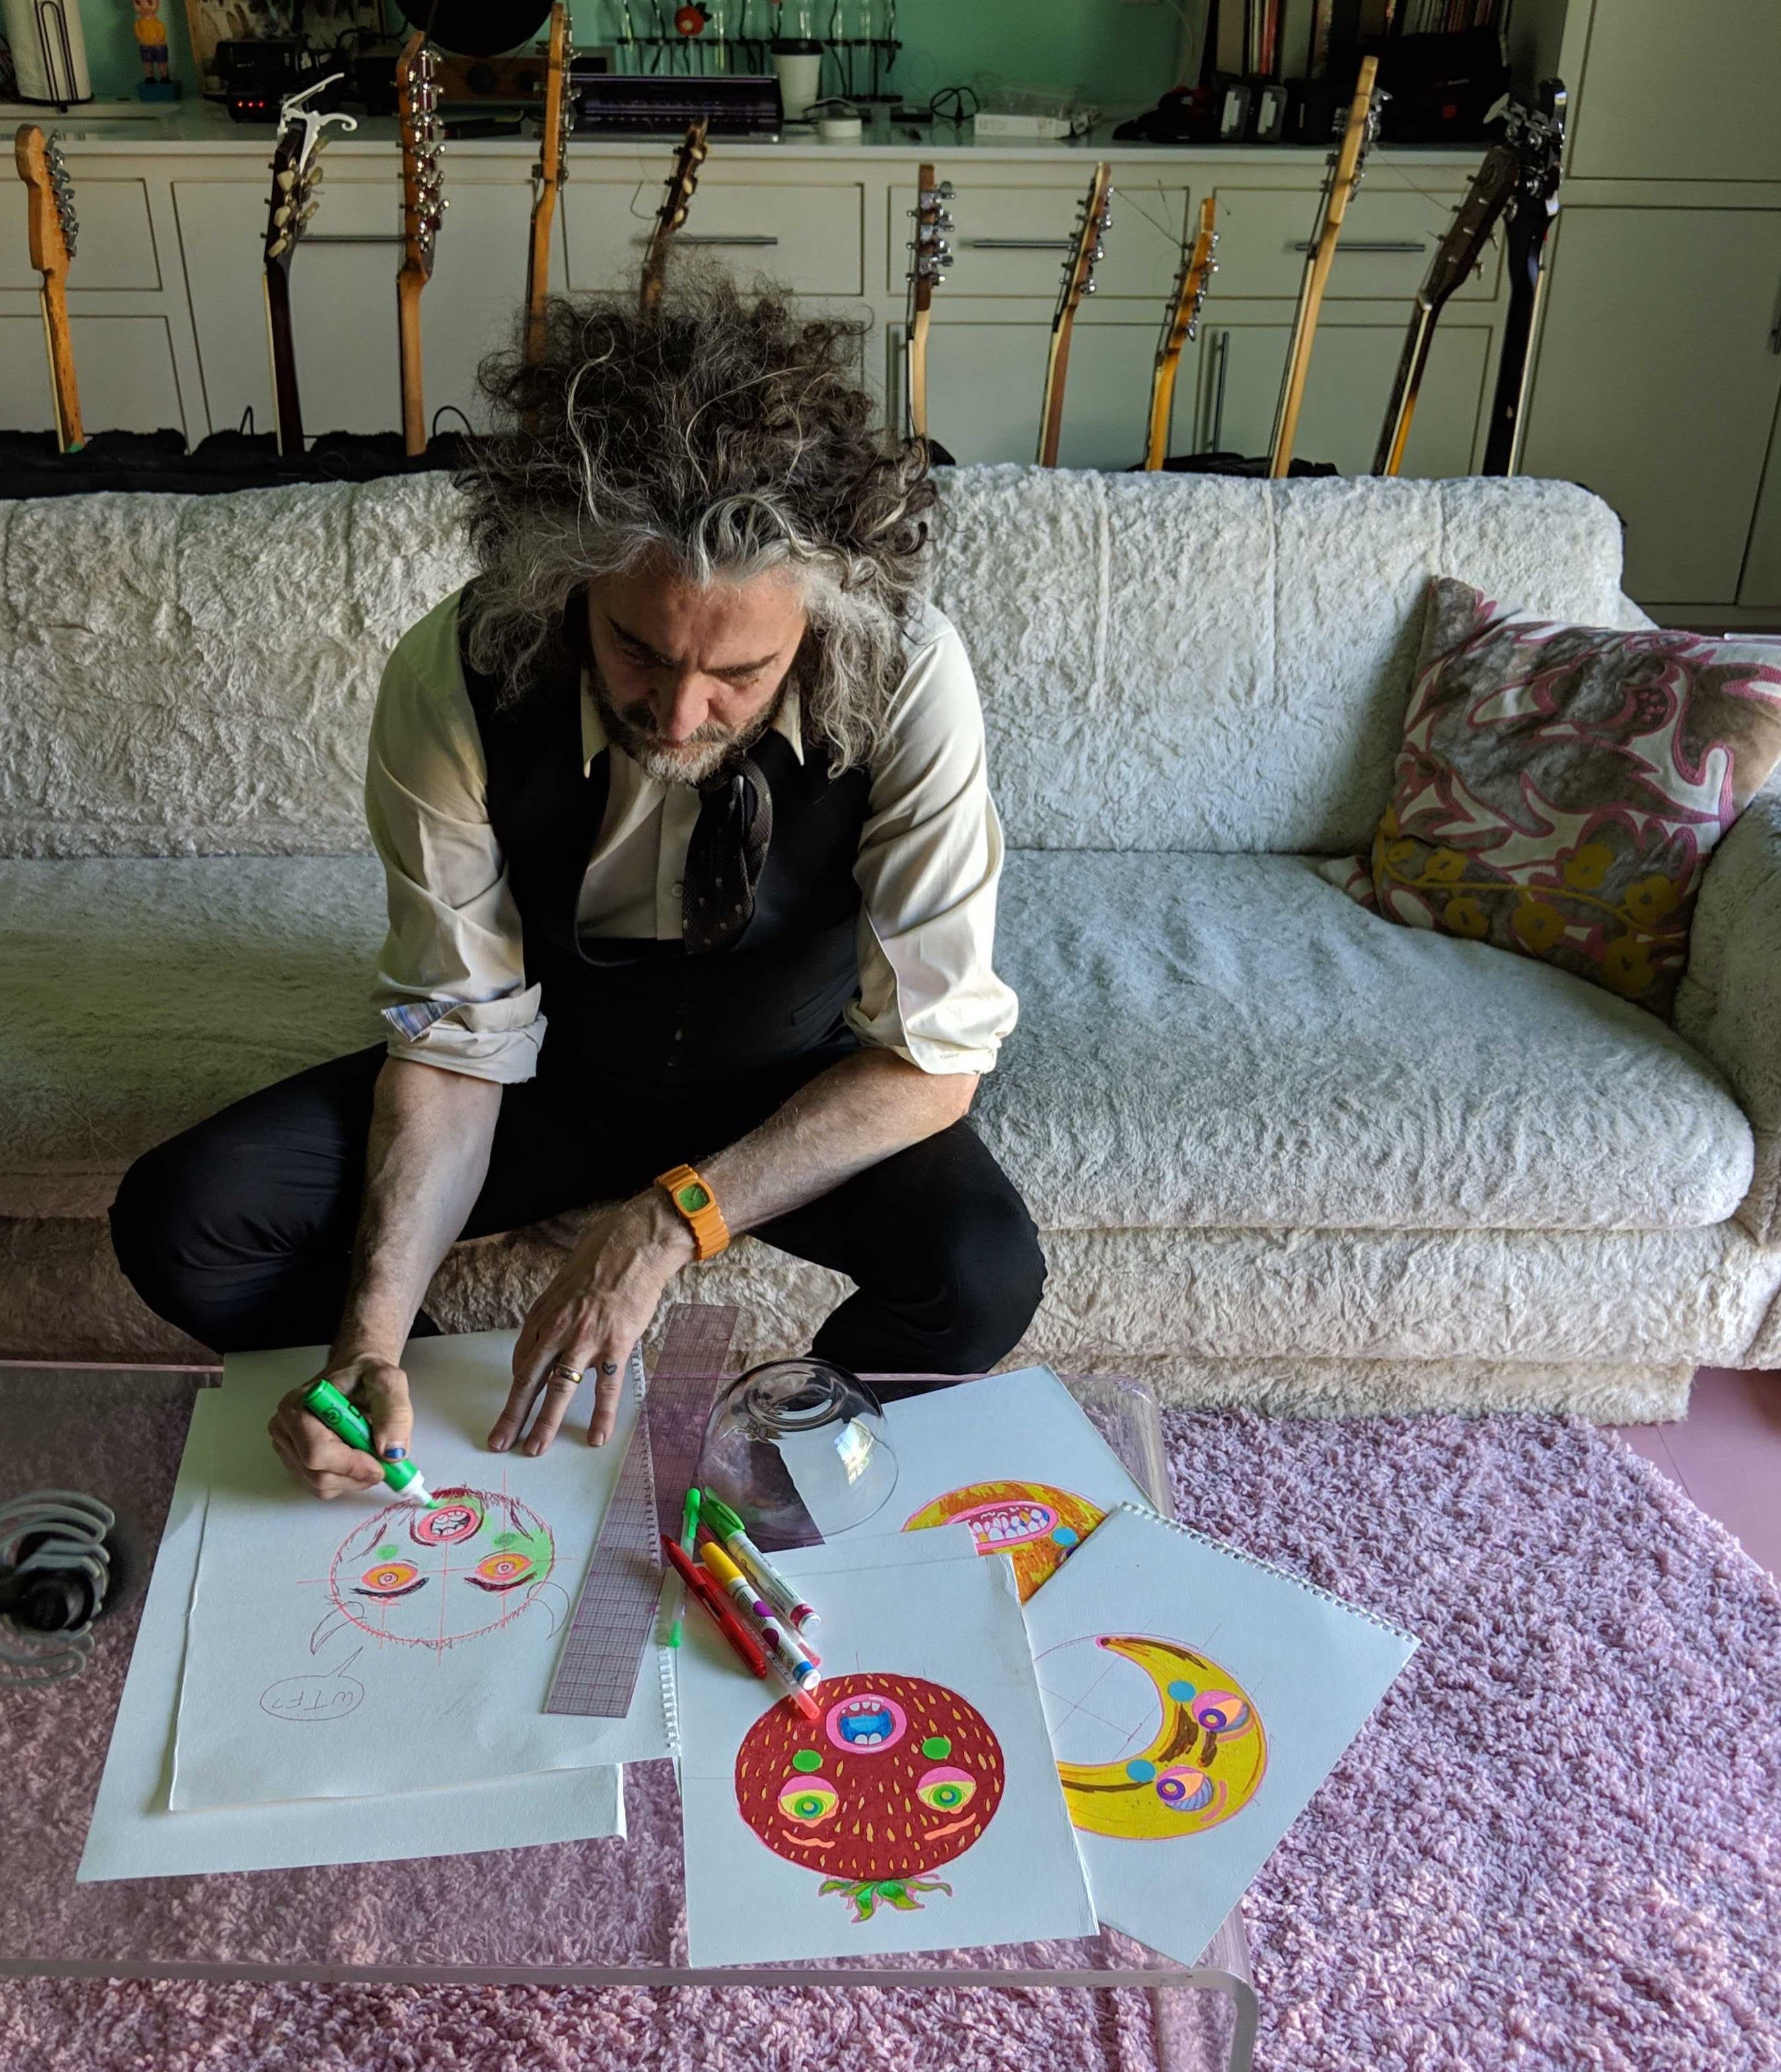 Wayne Coyne (The Flaming Lips) sketches designs for the inflatable fruit.